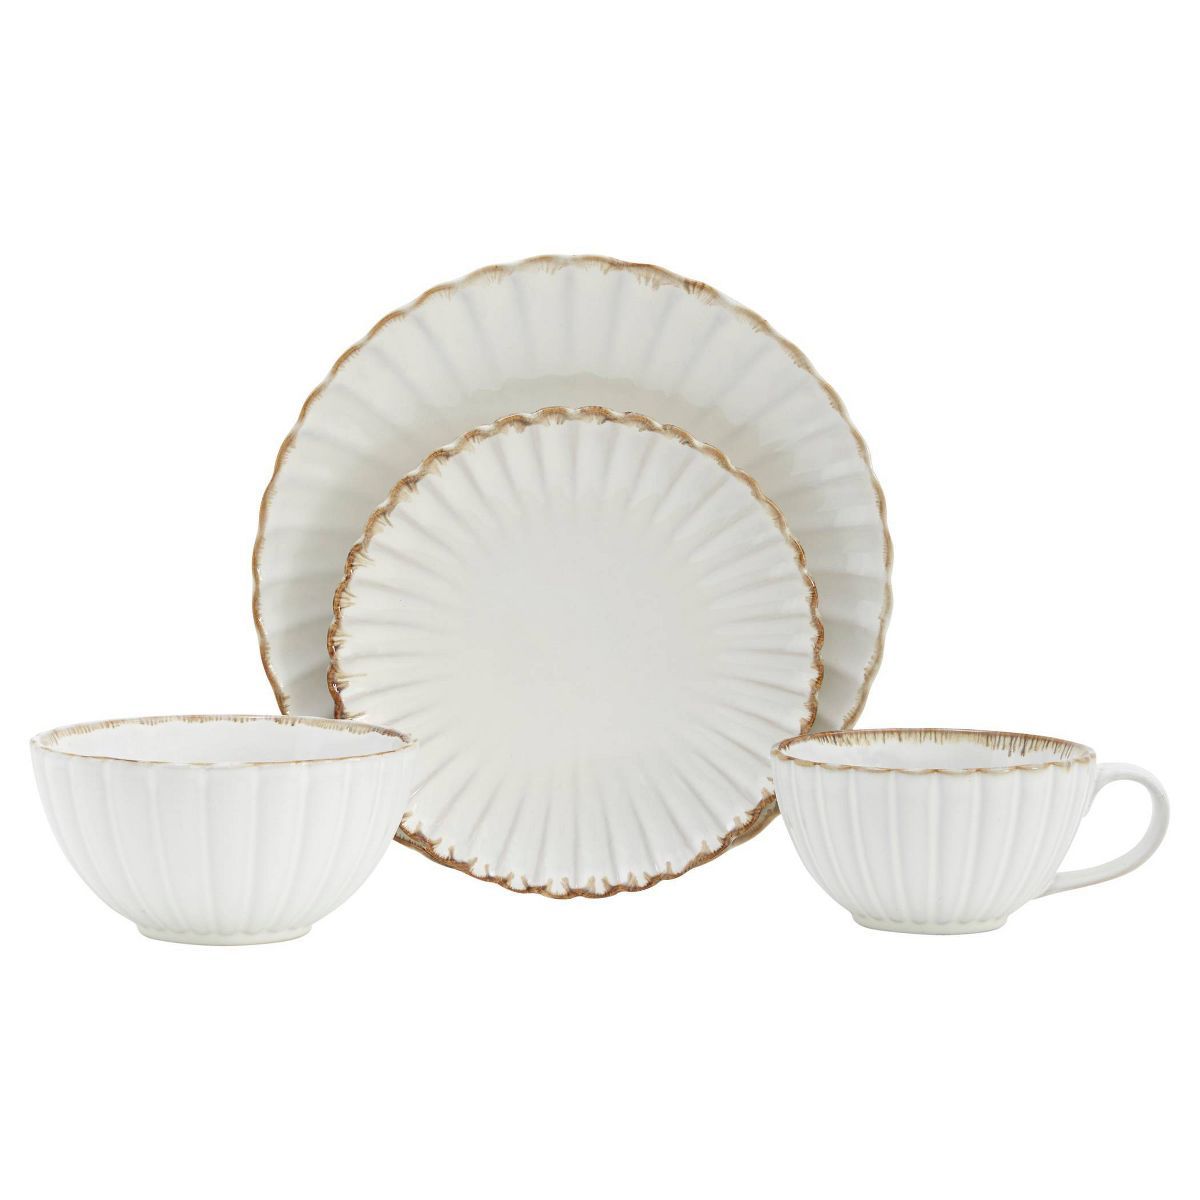 Baum Bros. 16pc Stoneware Pacific Dinnerware Set Off-White with Gold | Target